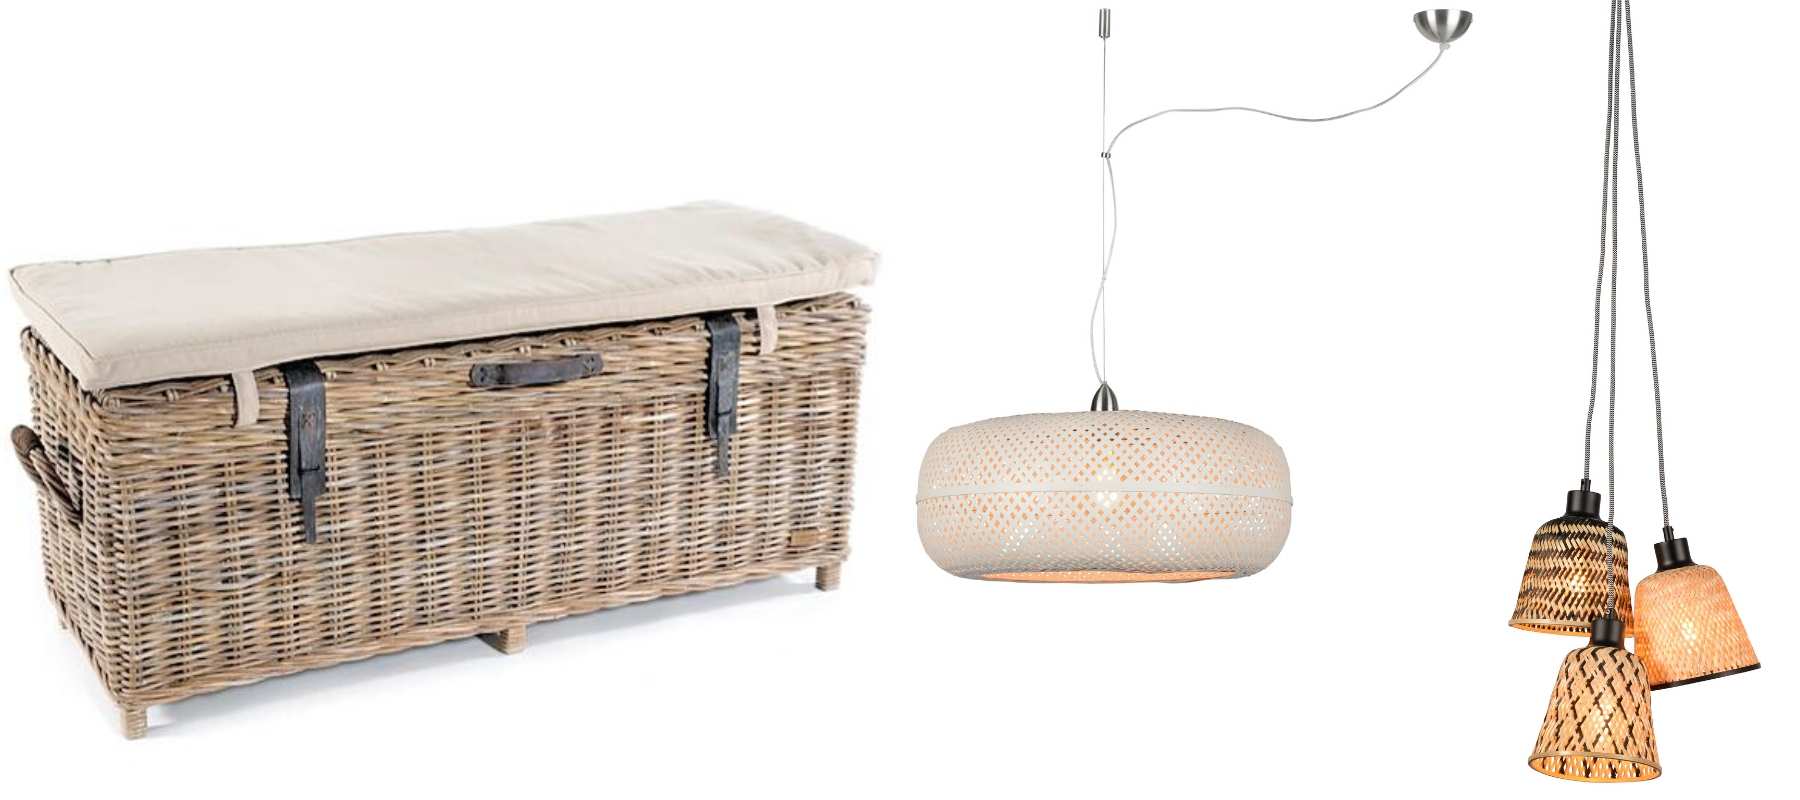 Rattan storage bench with cushion, white rattan pendant light and bamboo hanging lights